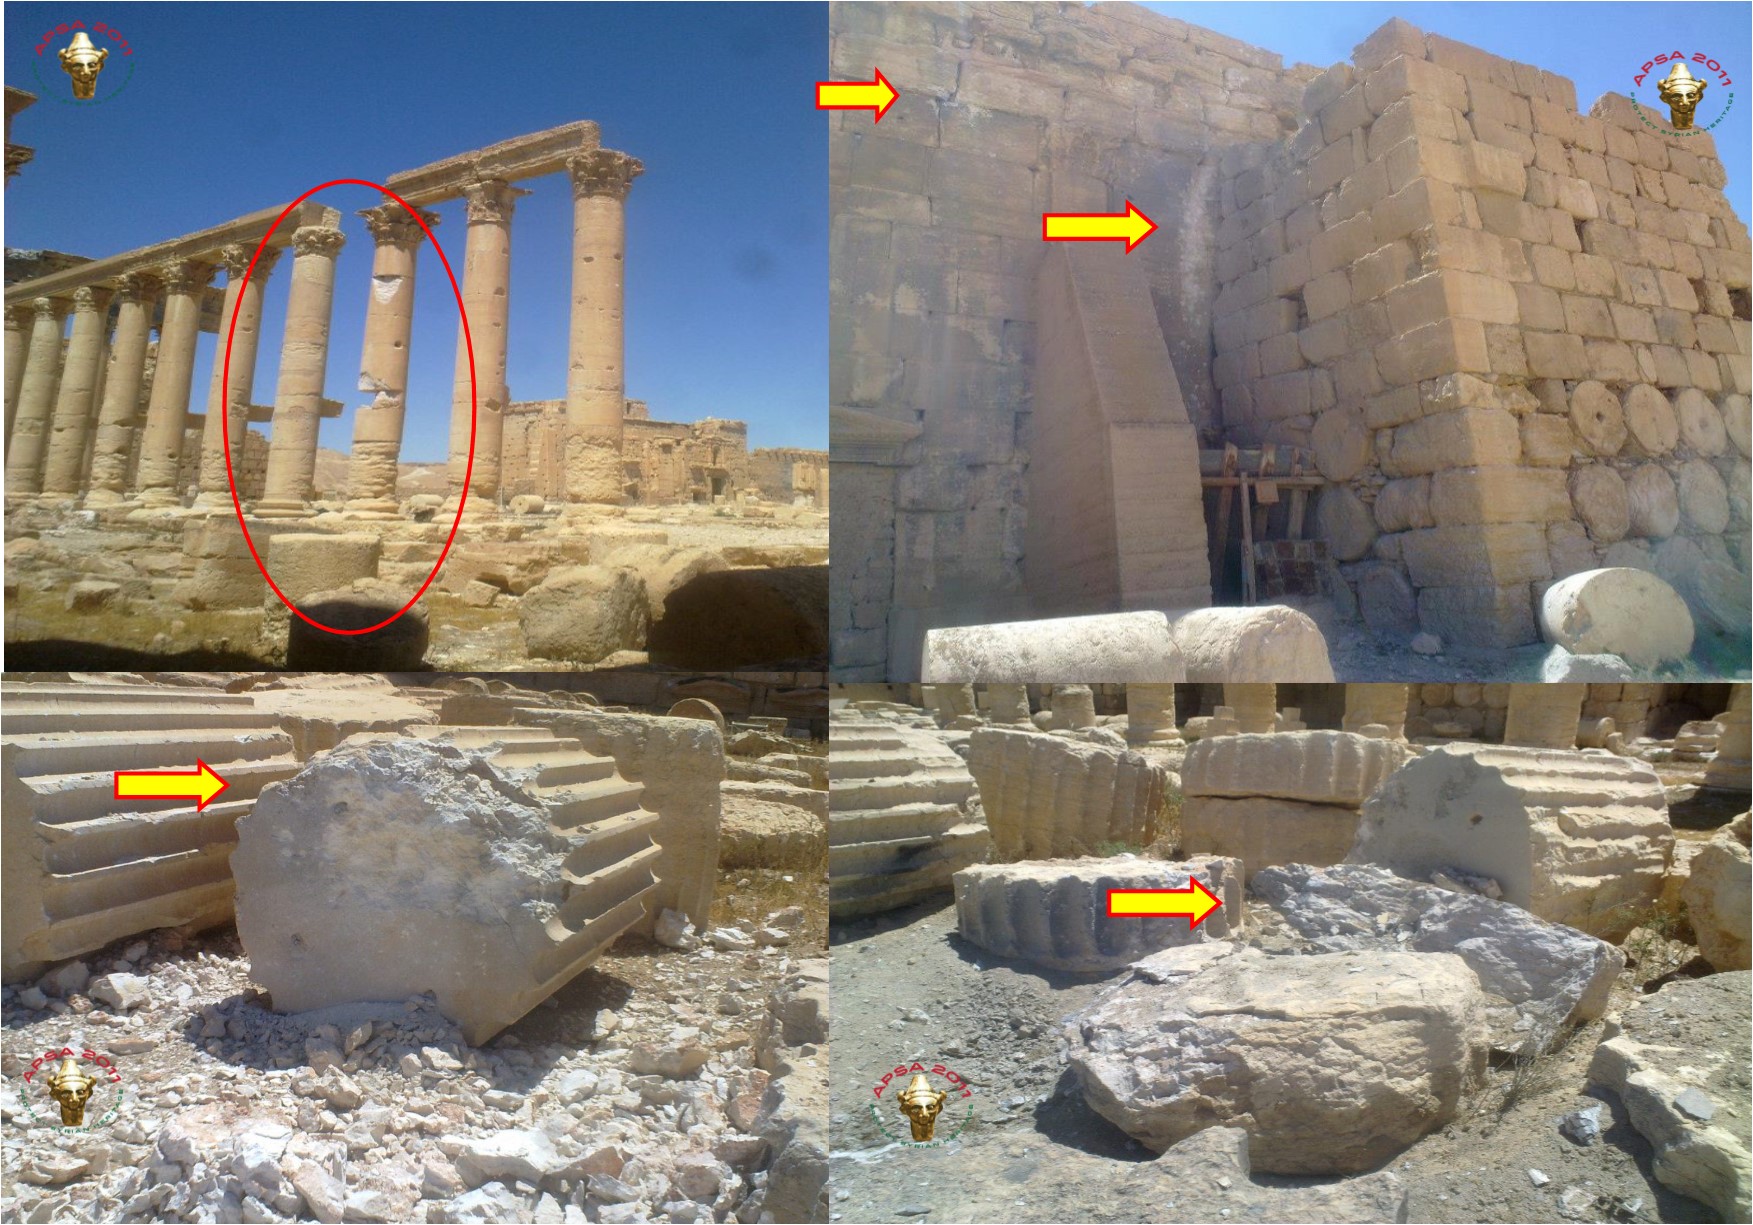 Damage to Temple of Bel by regime occupation, photo courtesy of APSA.